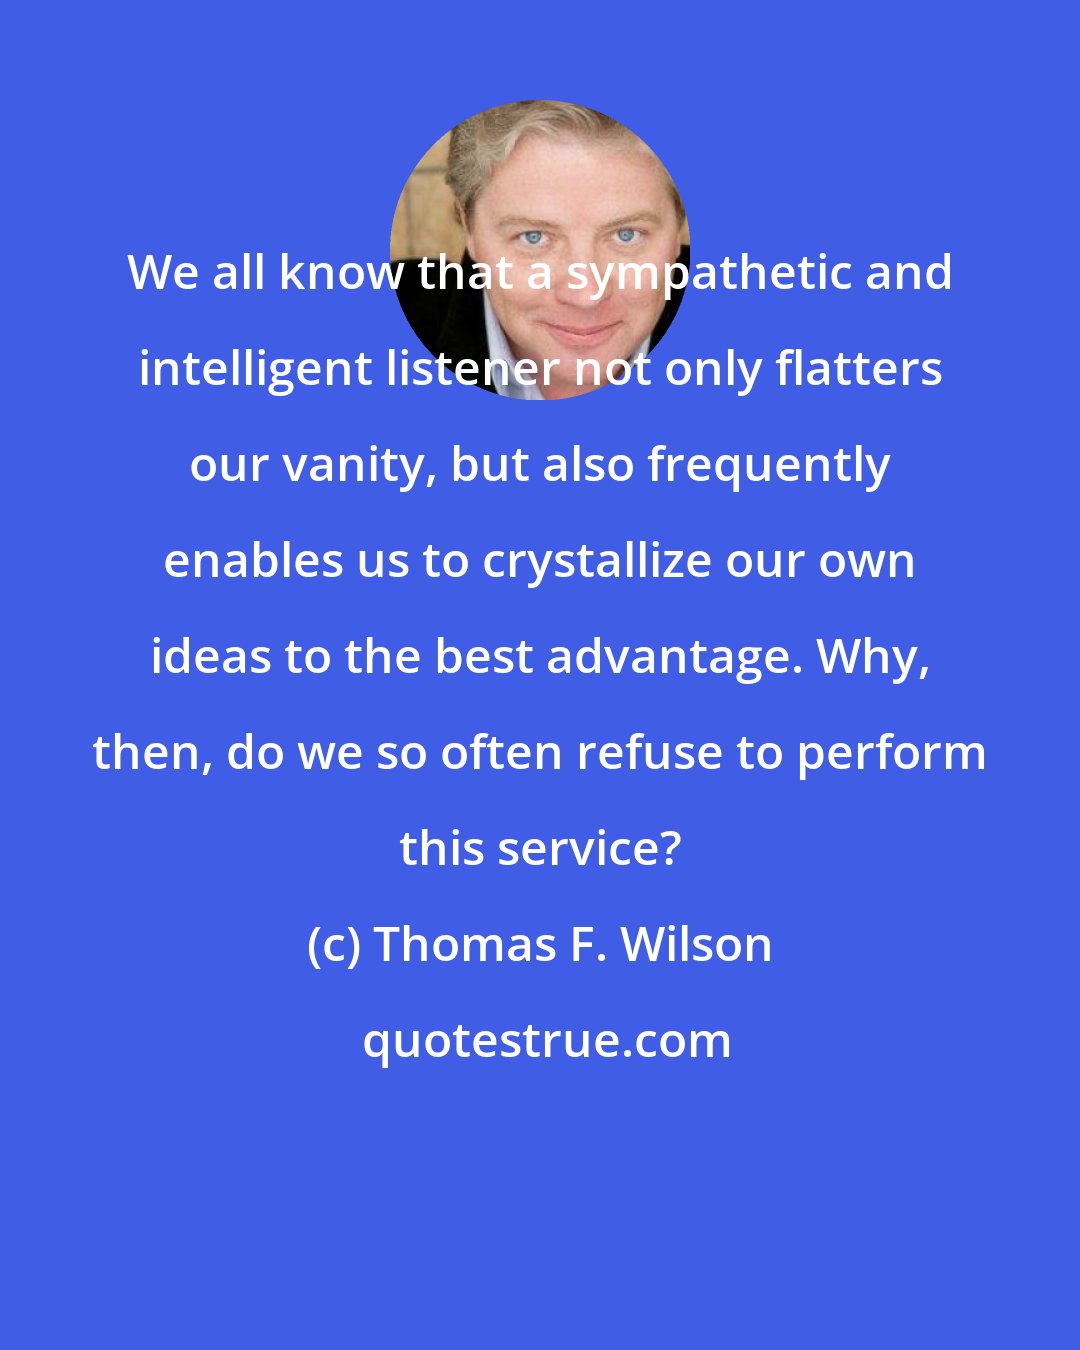 Thomas F. Wilson: We all know that a sympathetic and intelligent listener not only flatters our vanity, but also frequently enables us to crystallize our own ideas to the best advantage. Why, then, do we so often refuse to perform this service?